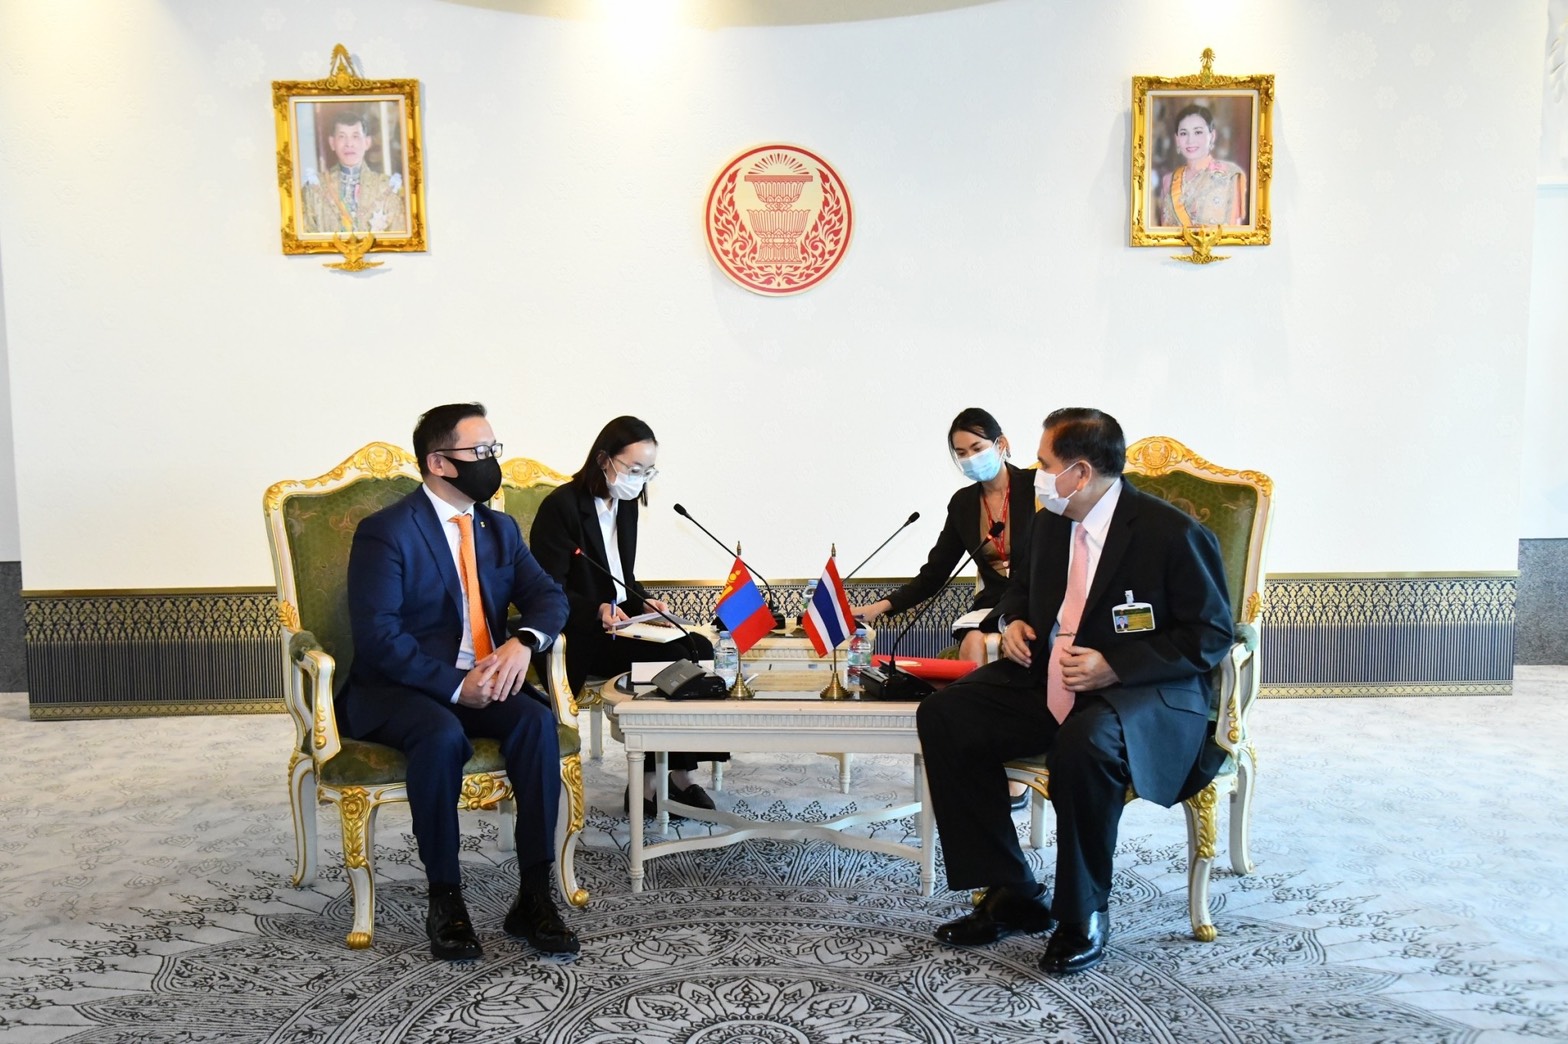 Chairman of the Committee on Tourism welcomed Minister of Environment and Tourism of Mongolia